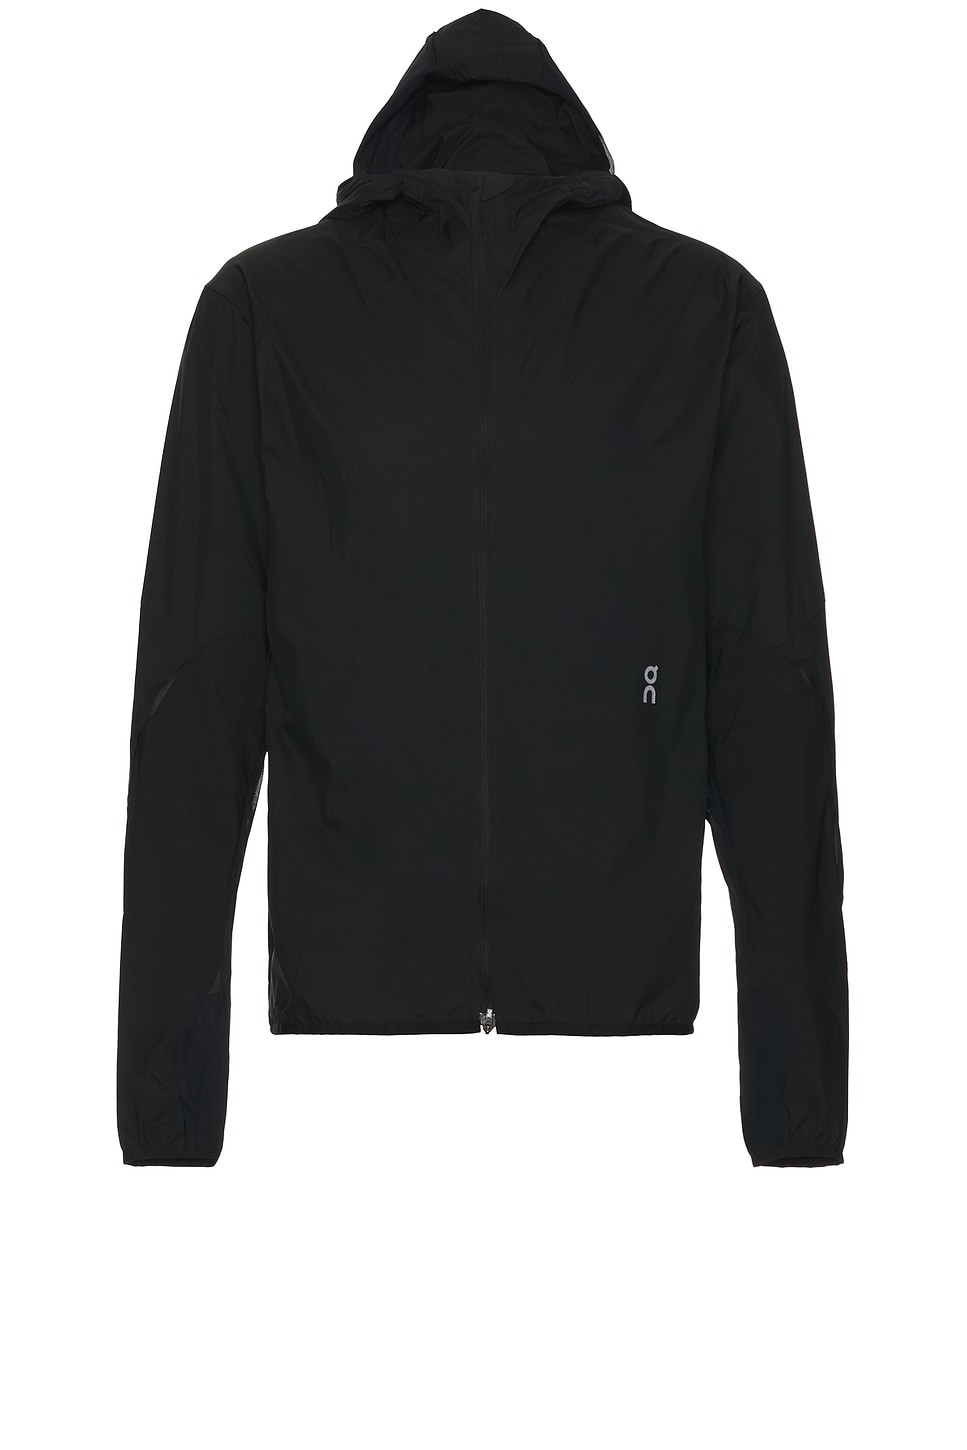 Image 1 of On x Post Archive Faction (PAF) Running Jacket in Black